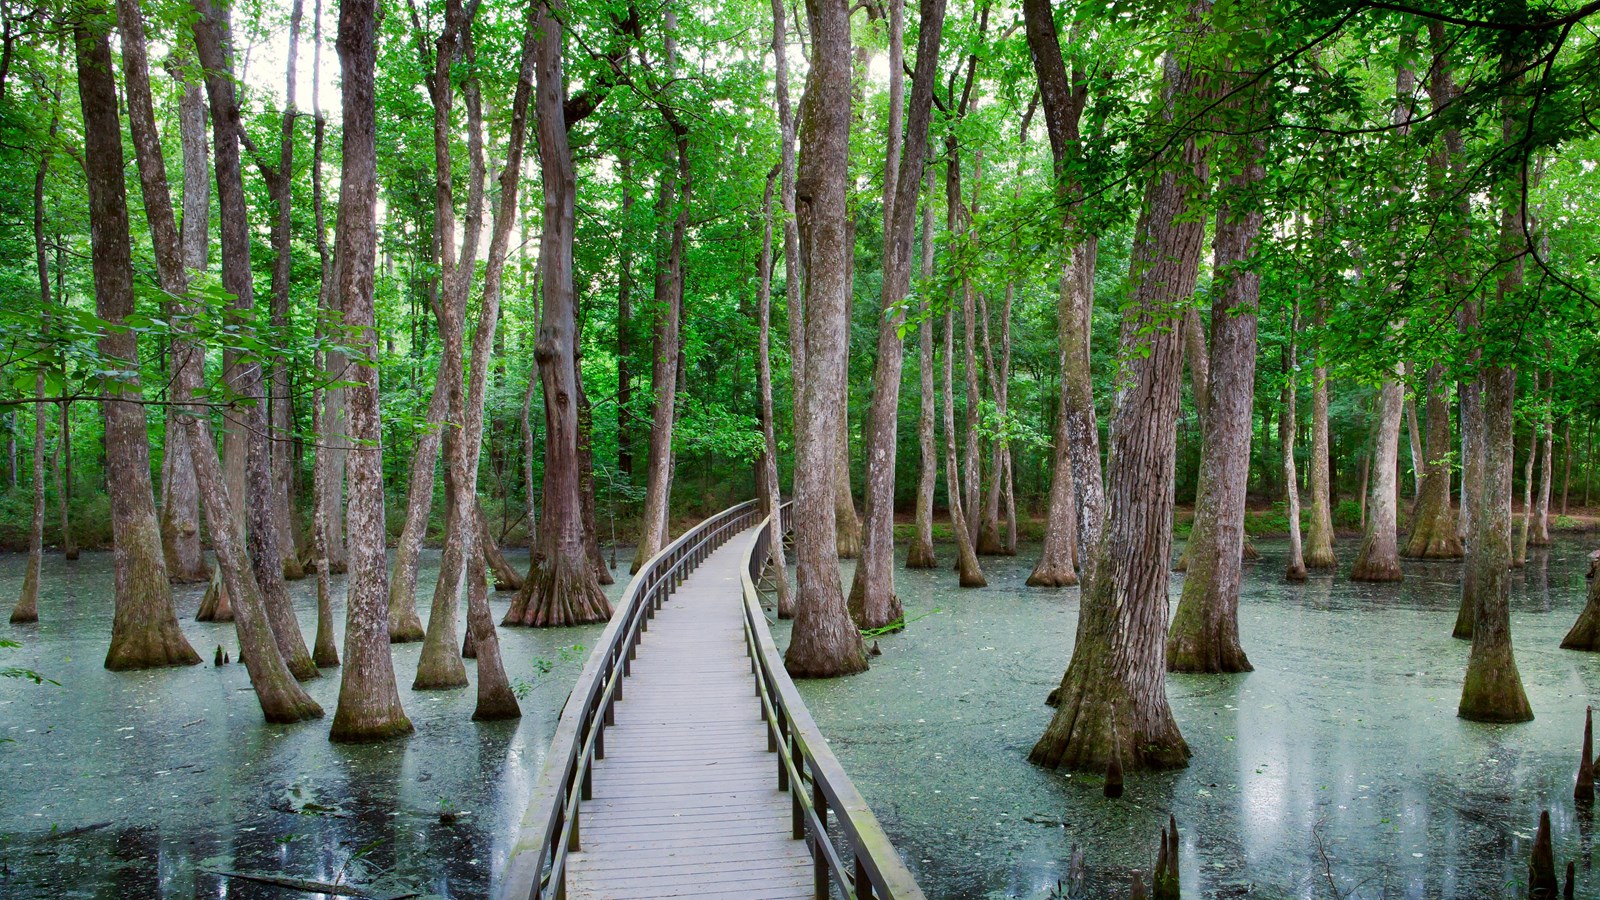 Boardwalk over swamp going away from the visitor. Cypress trees growing out of the water.